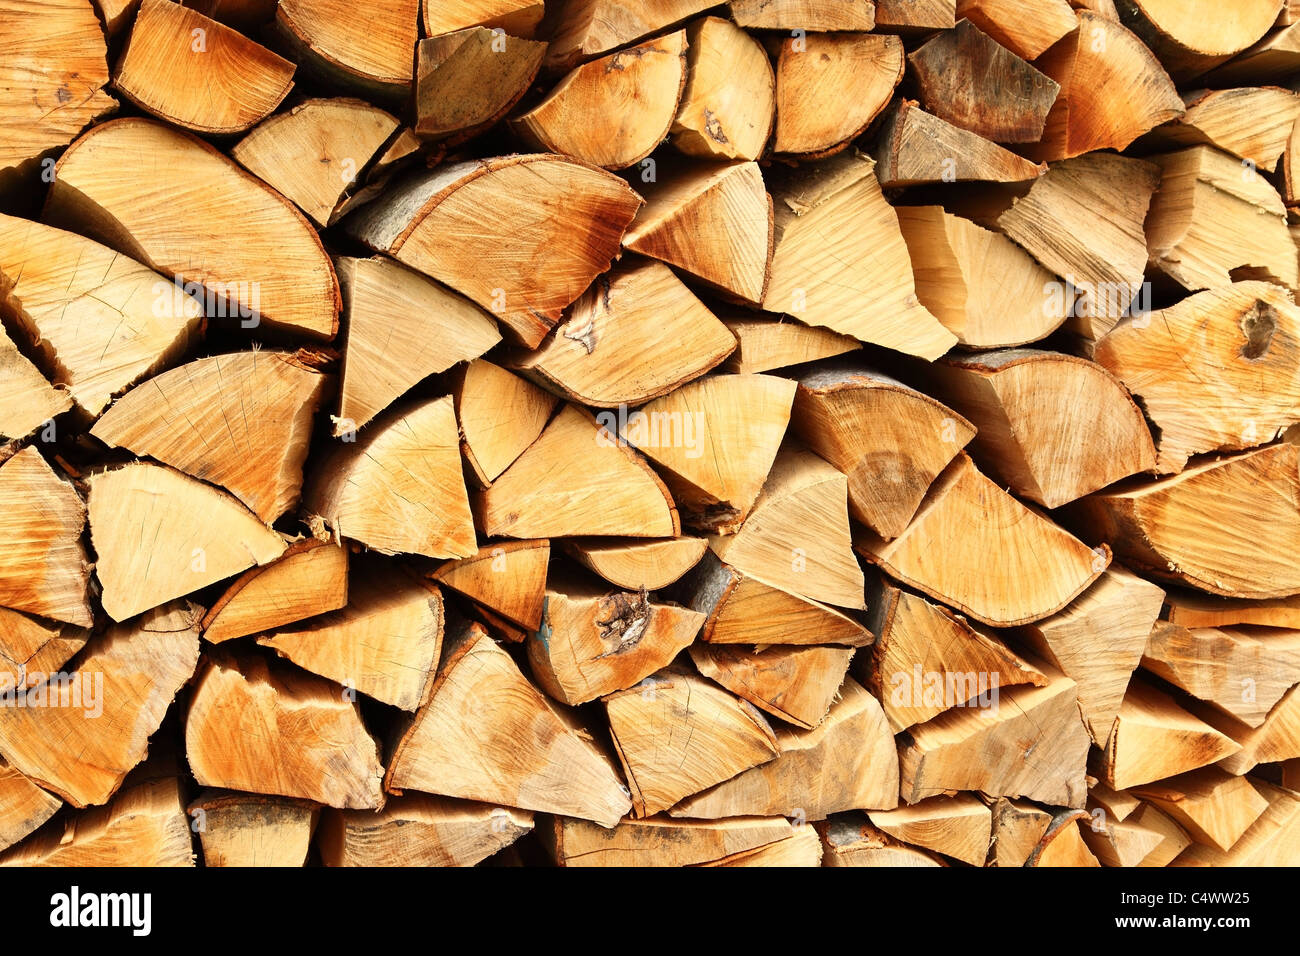 Pile of chopped fire wood prepared for winter Stock Photo